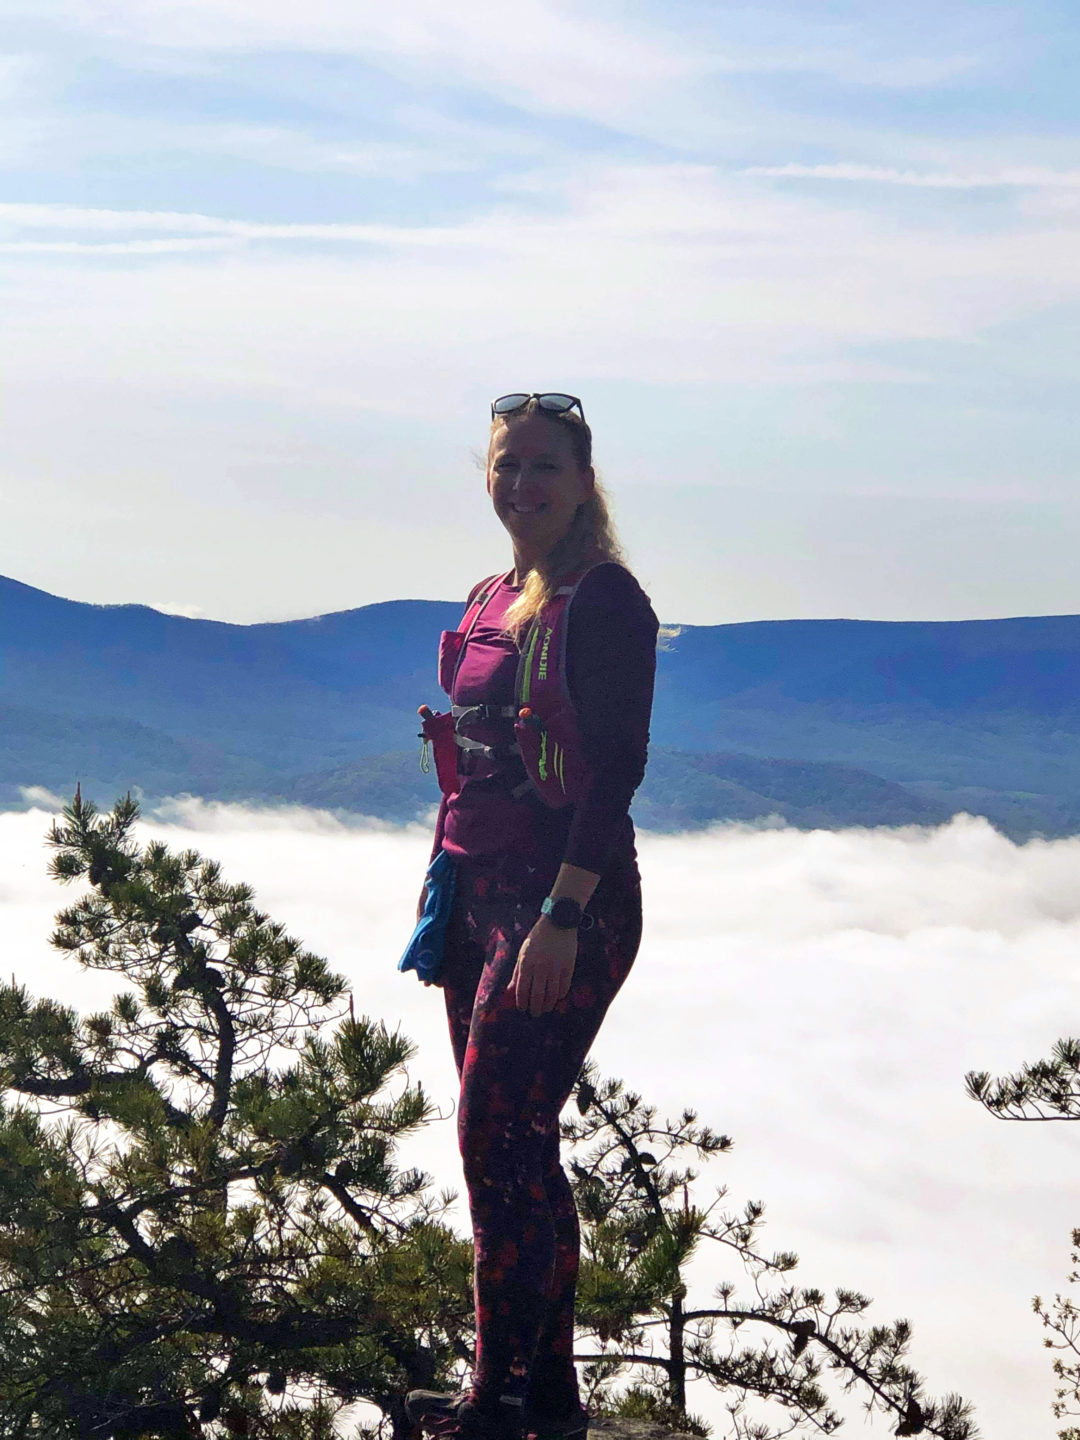 Becky hiking in the clouds - photo credit: Becky McGraw